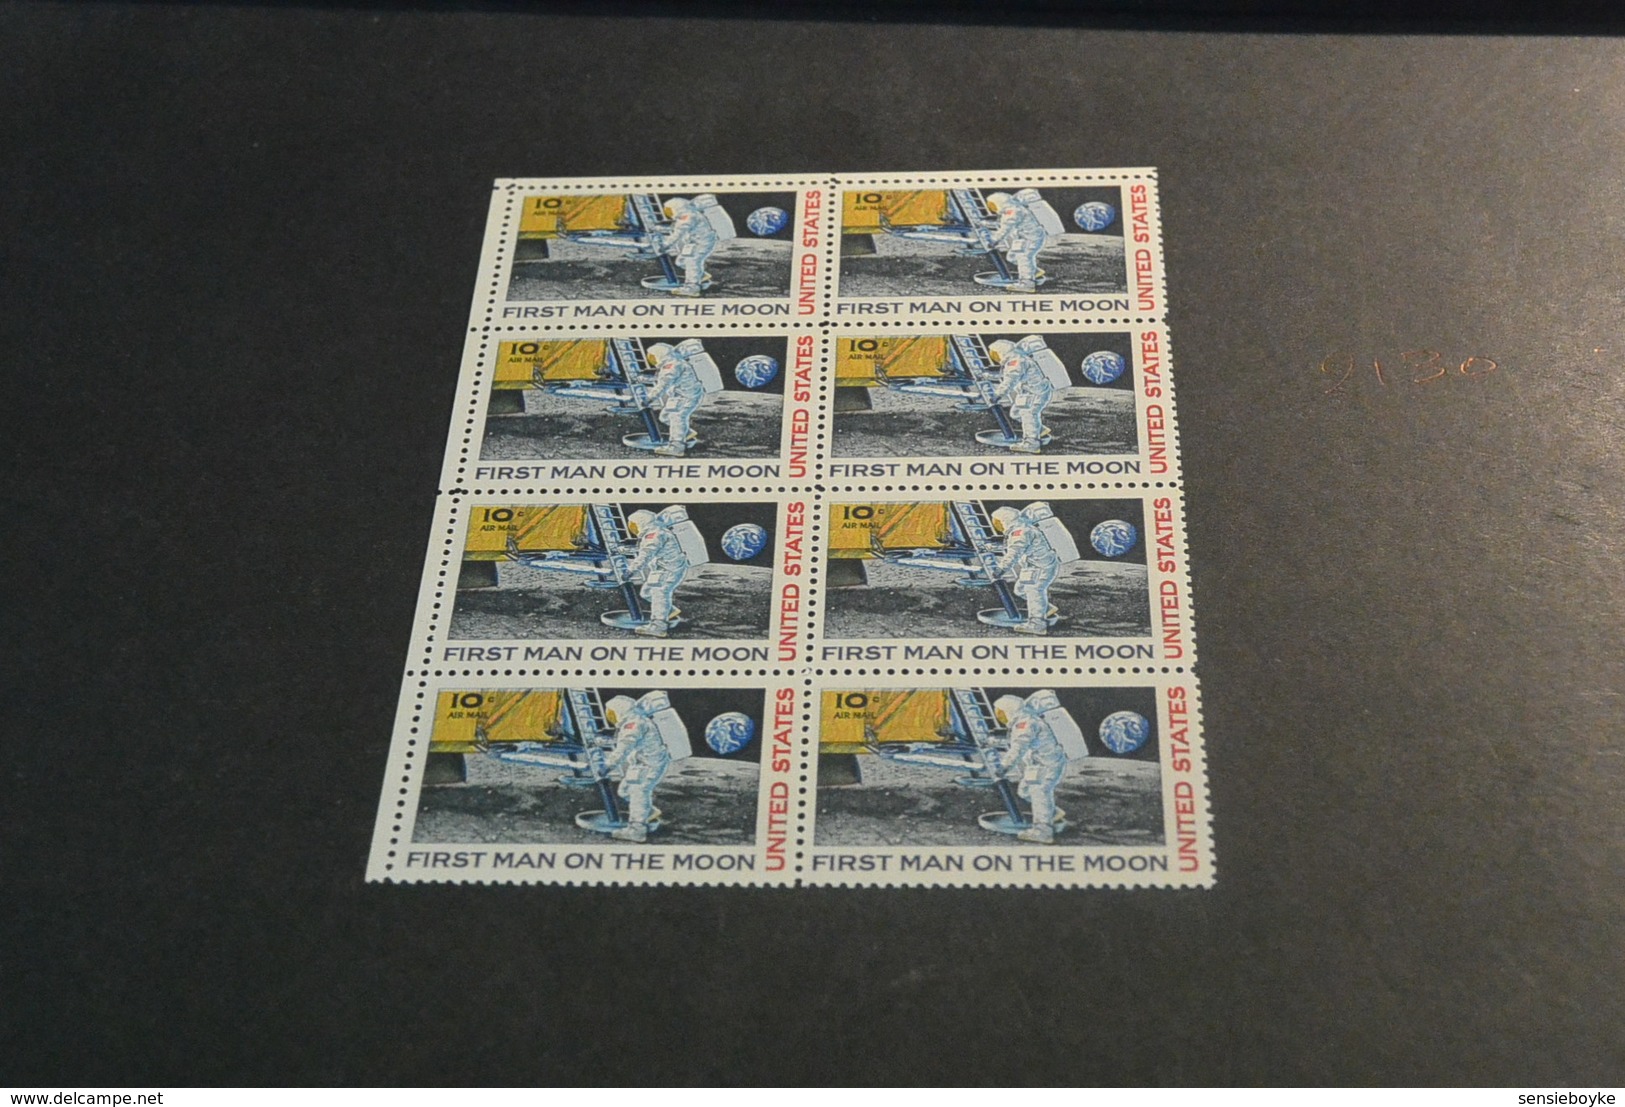 M1799 - Stamp In Bloc Of 8  US - 1974 - SPACE - SKYLAB PROJECT - # 1529 - United States